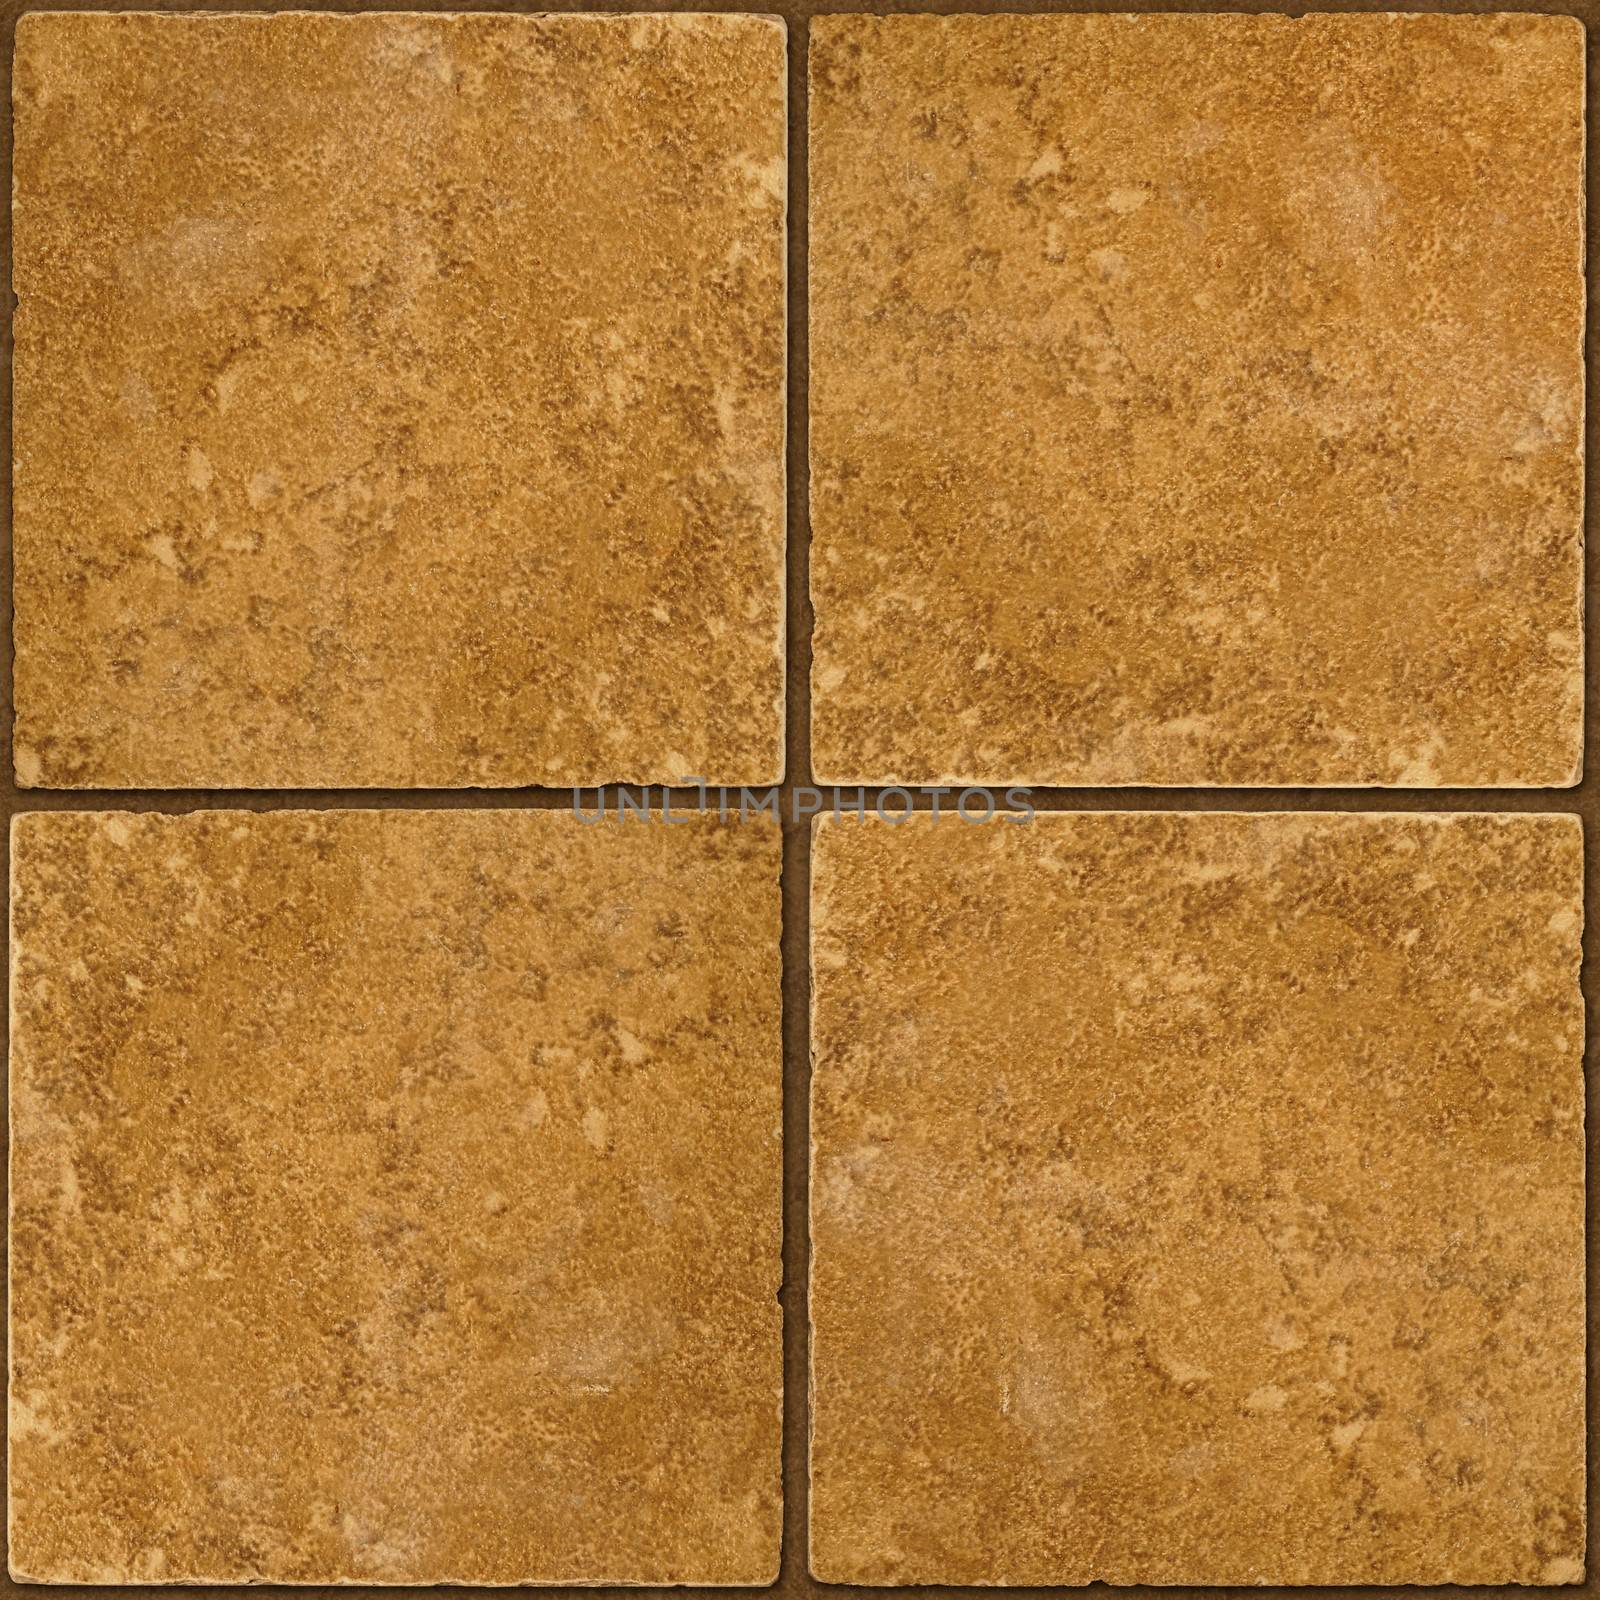 Ceramic brown stone tiles seamlessly tileable by Balefire9